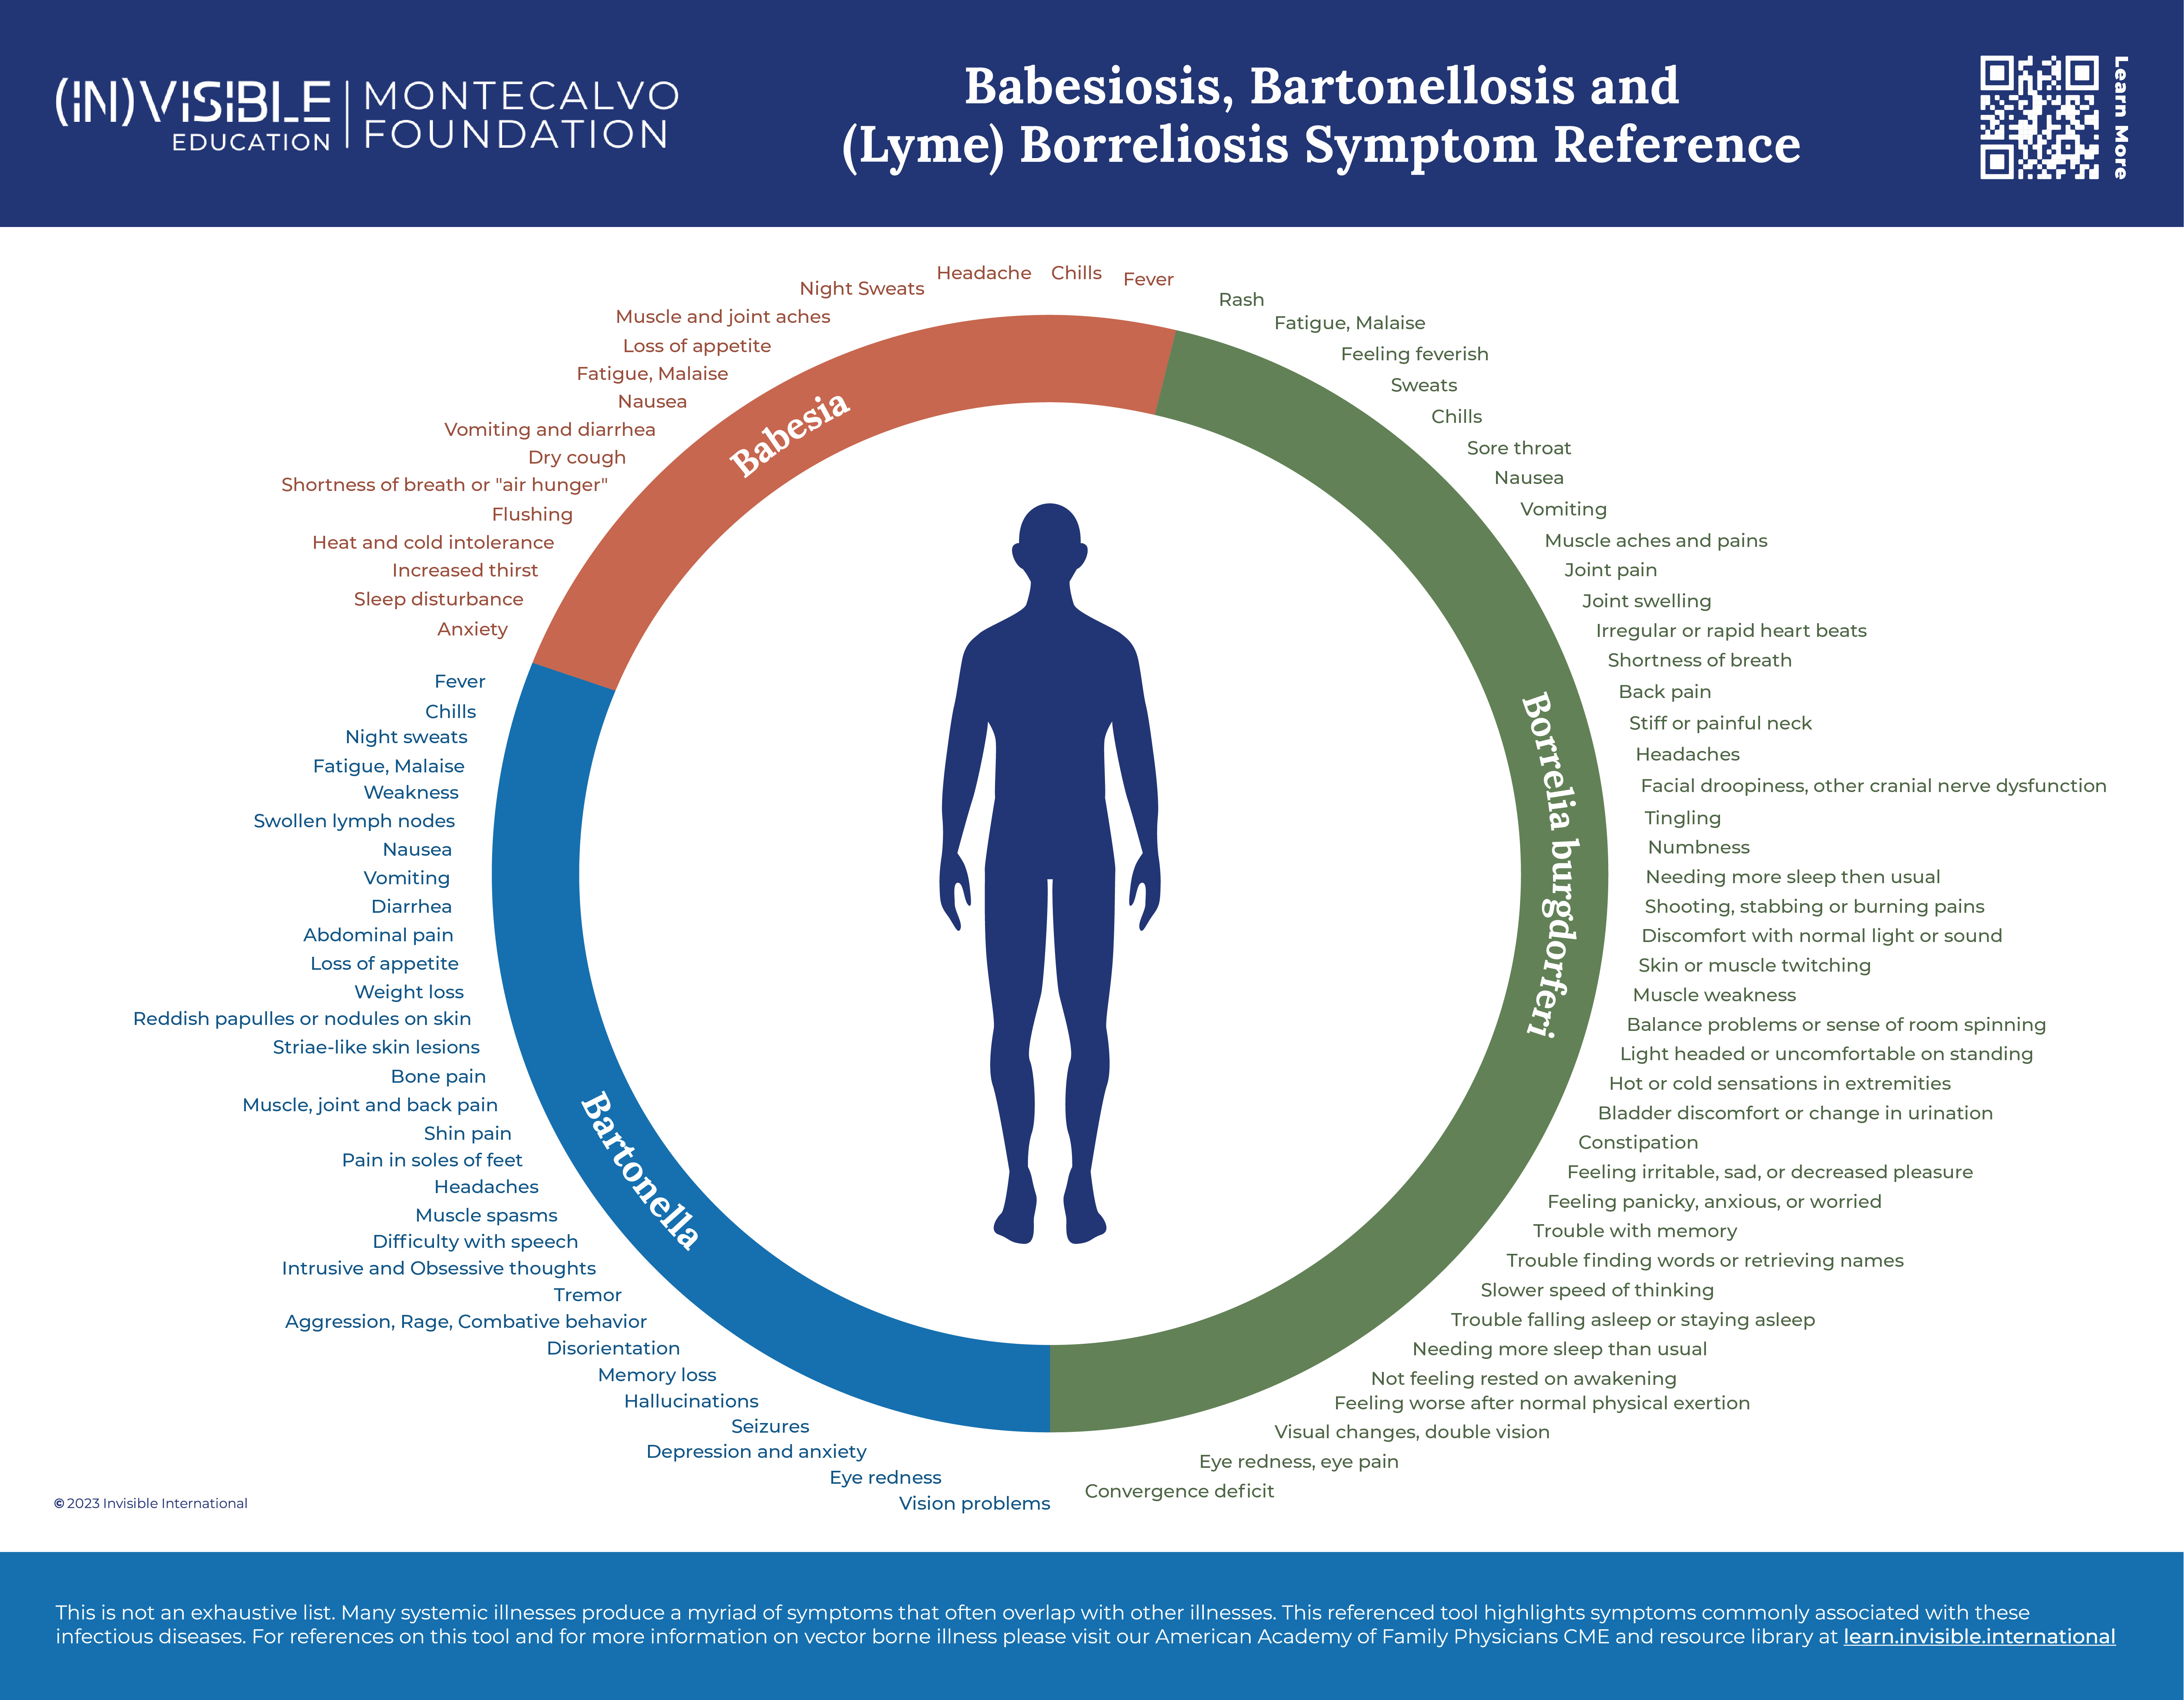 Babesiosis-Bartonellosis-and-Lyme-Borreliosis-Symptom-Reference-Updated-06.07.23.png